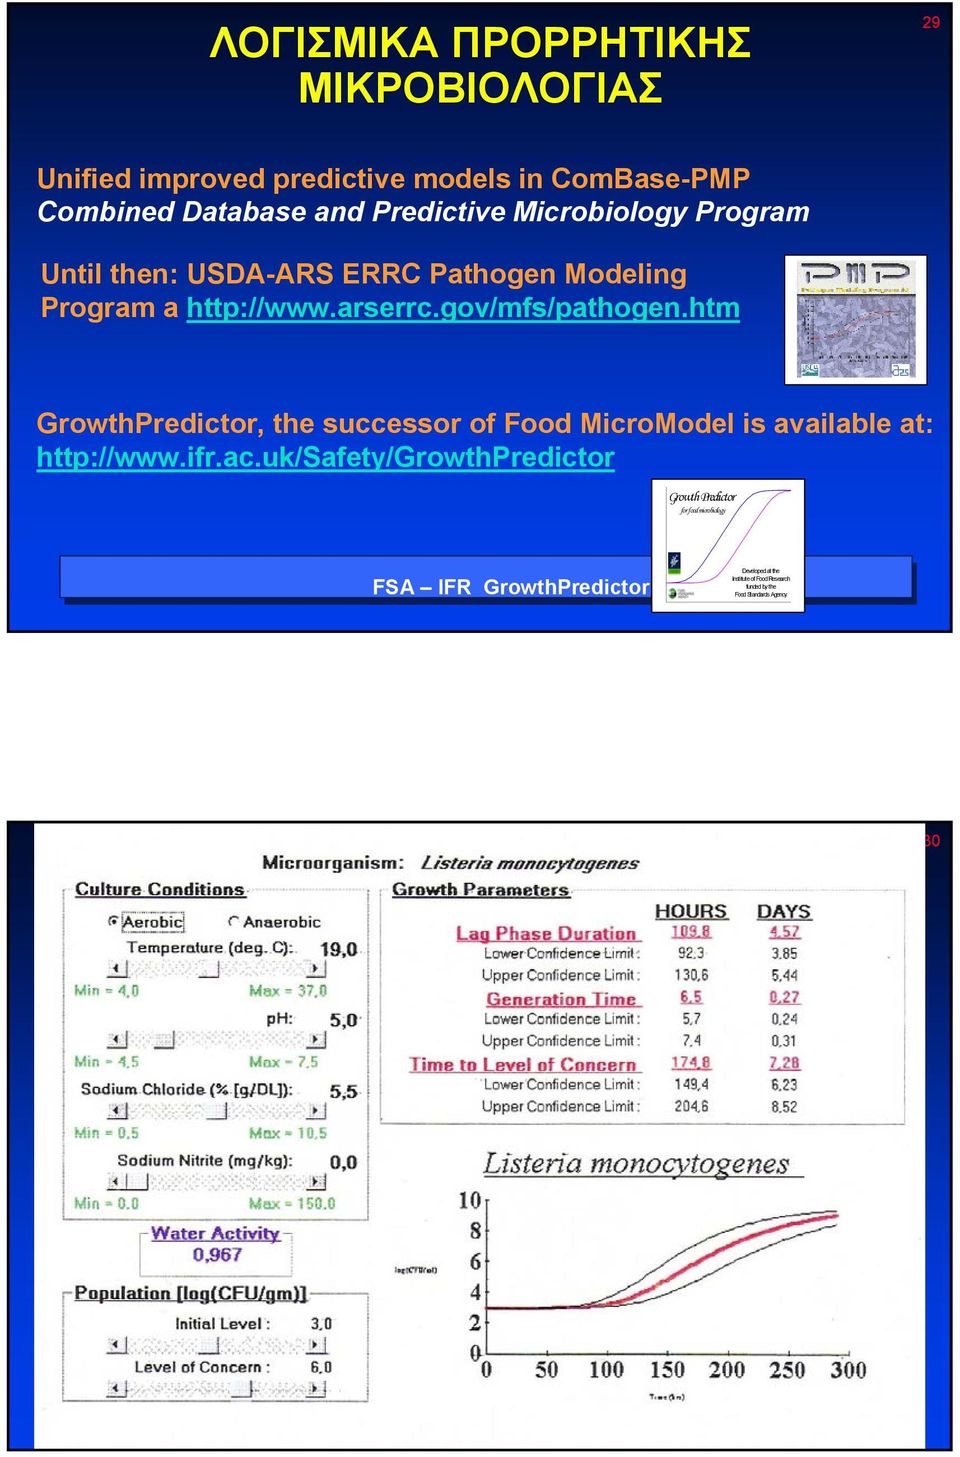 htm GrowthPredictor, the successor of Food MicroModel is available at: http://www.ifr.ac.